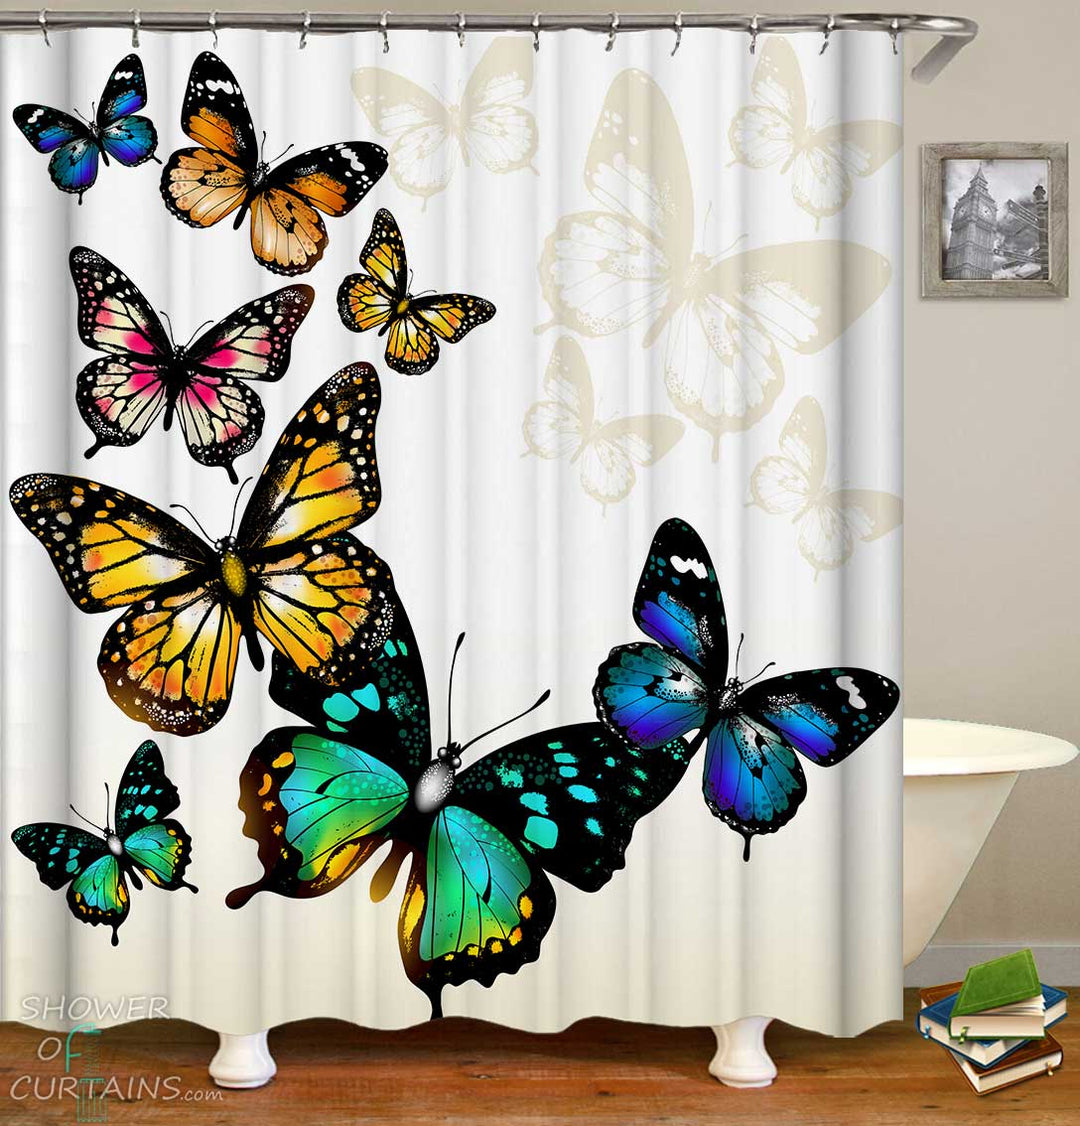 Shower Curtains with Colorful Butterflies